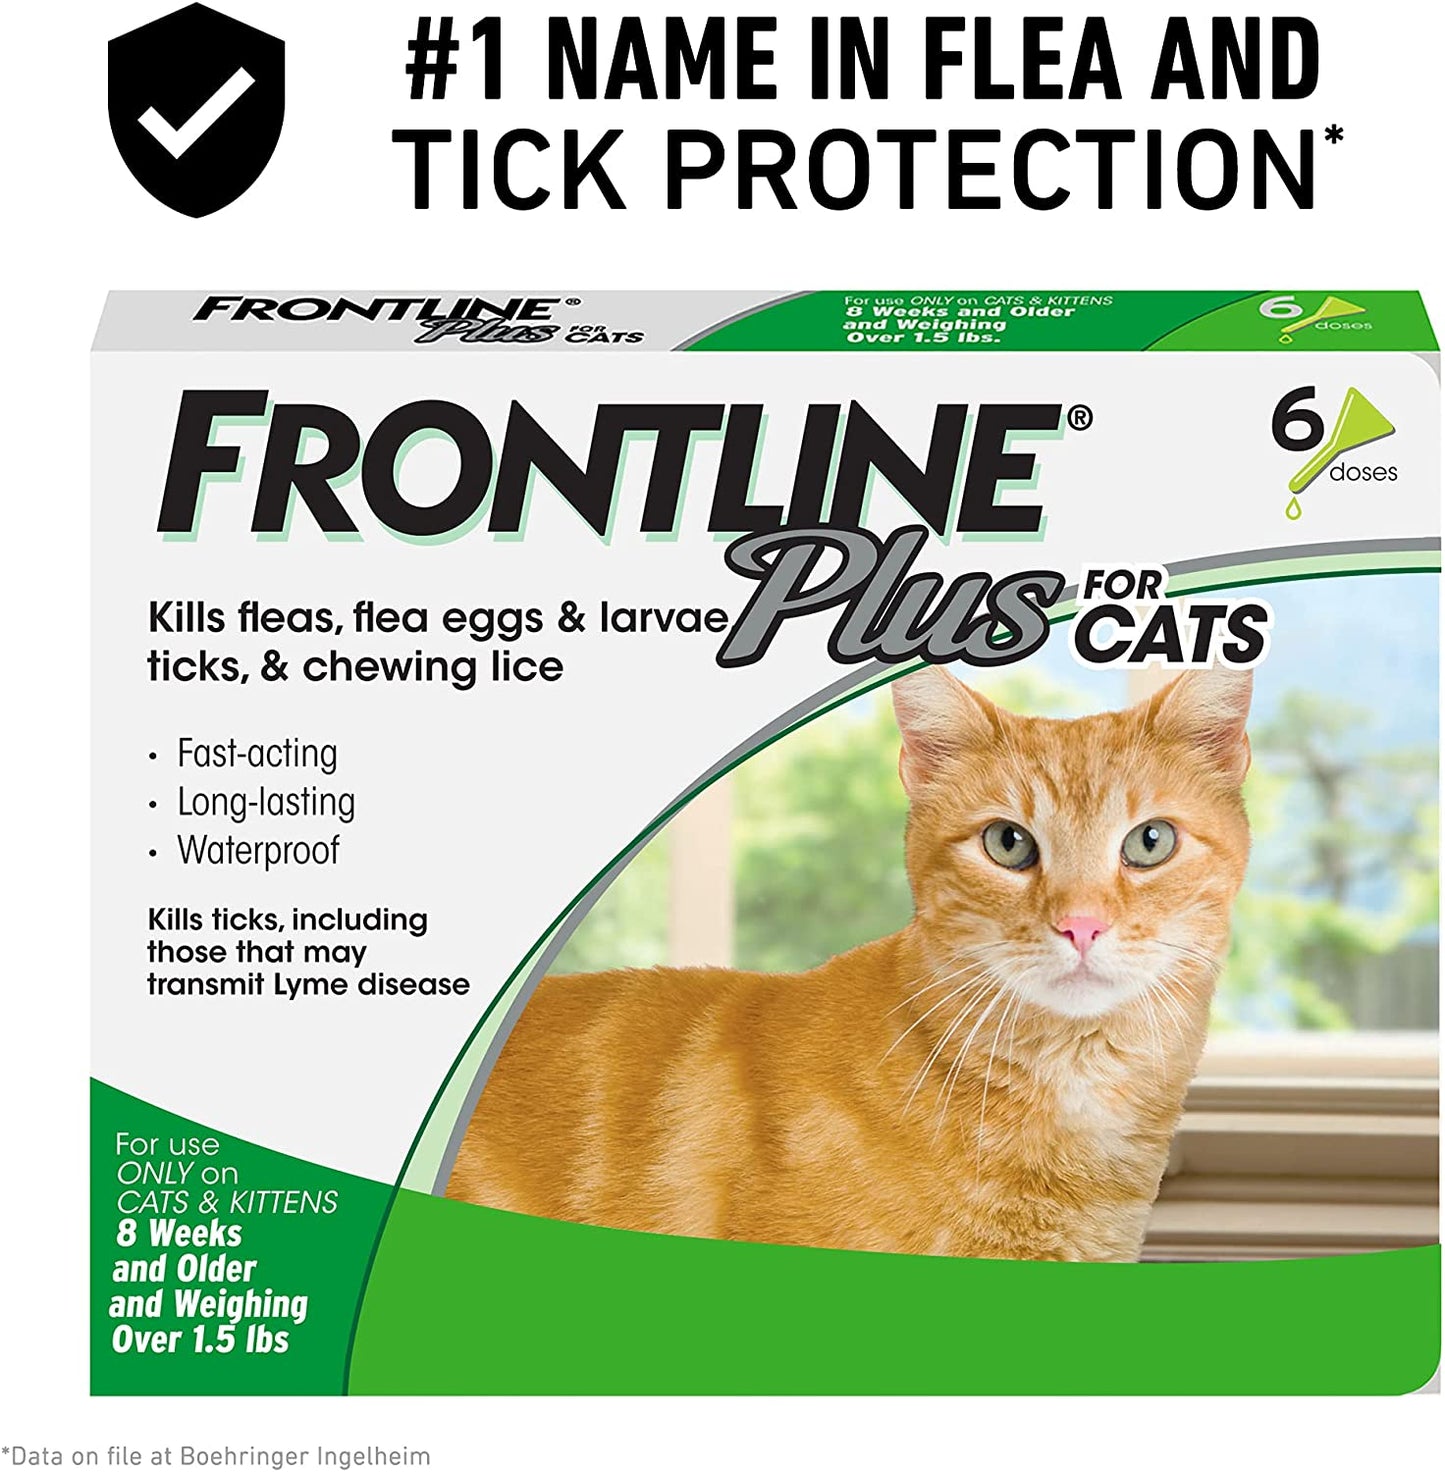 Frontlinee Plus for Cats 8 Weeks and Older and Weighing 1.5 Lbs or More, 6 doses